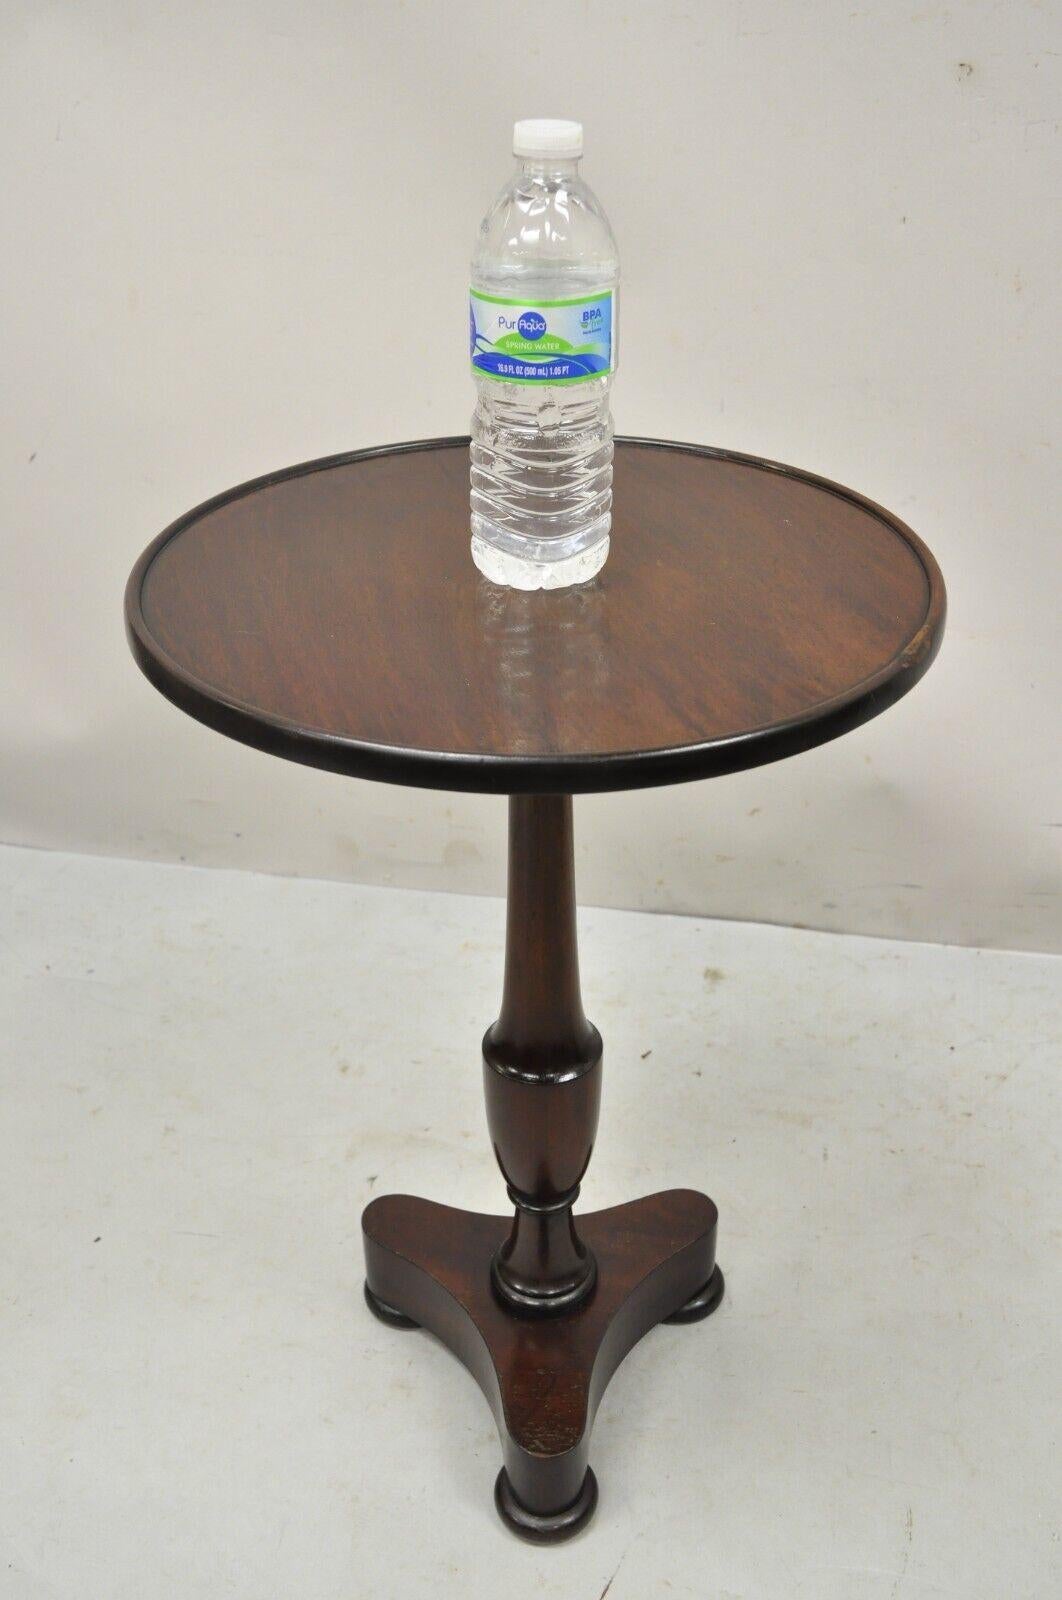 Antique mahogany Small Empire Pedestal Base Round accent side table. Item features a solid mahogany pedestal base, round top, nice small size, very nice antique item, quality craftsmanship. Circa Early 1900s. Measurements: 22.5